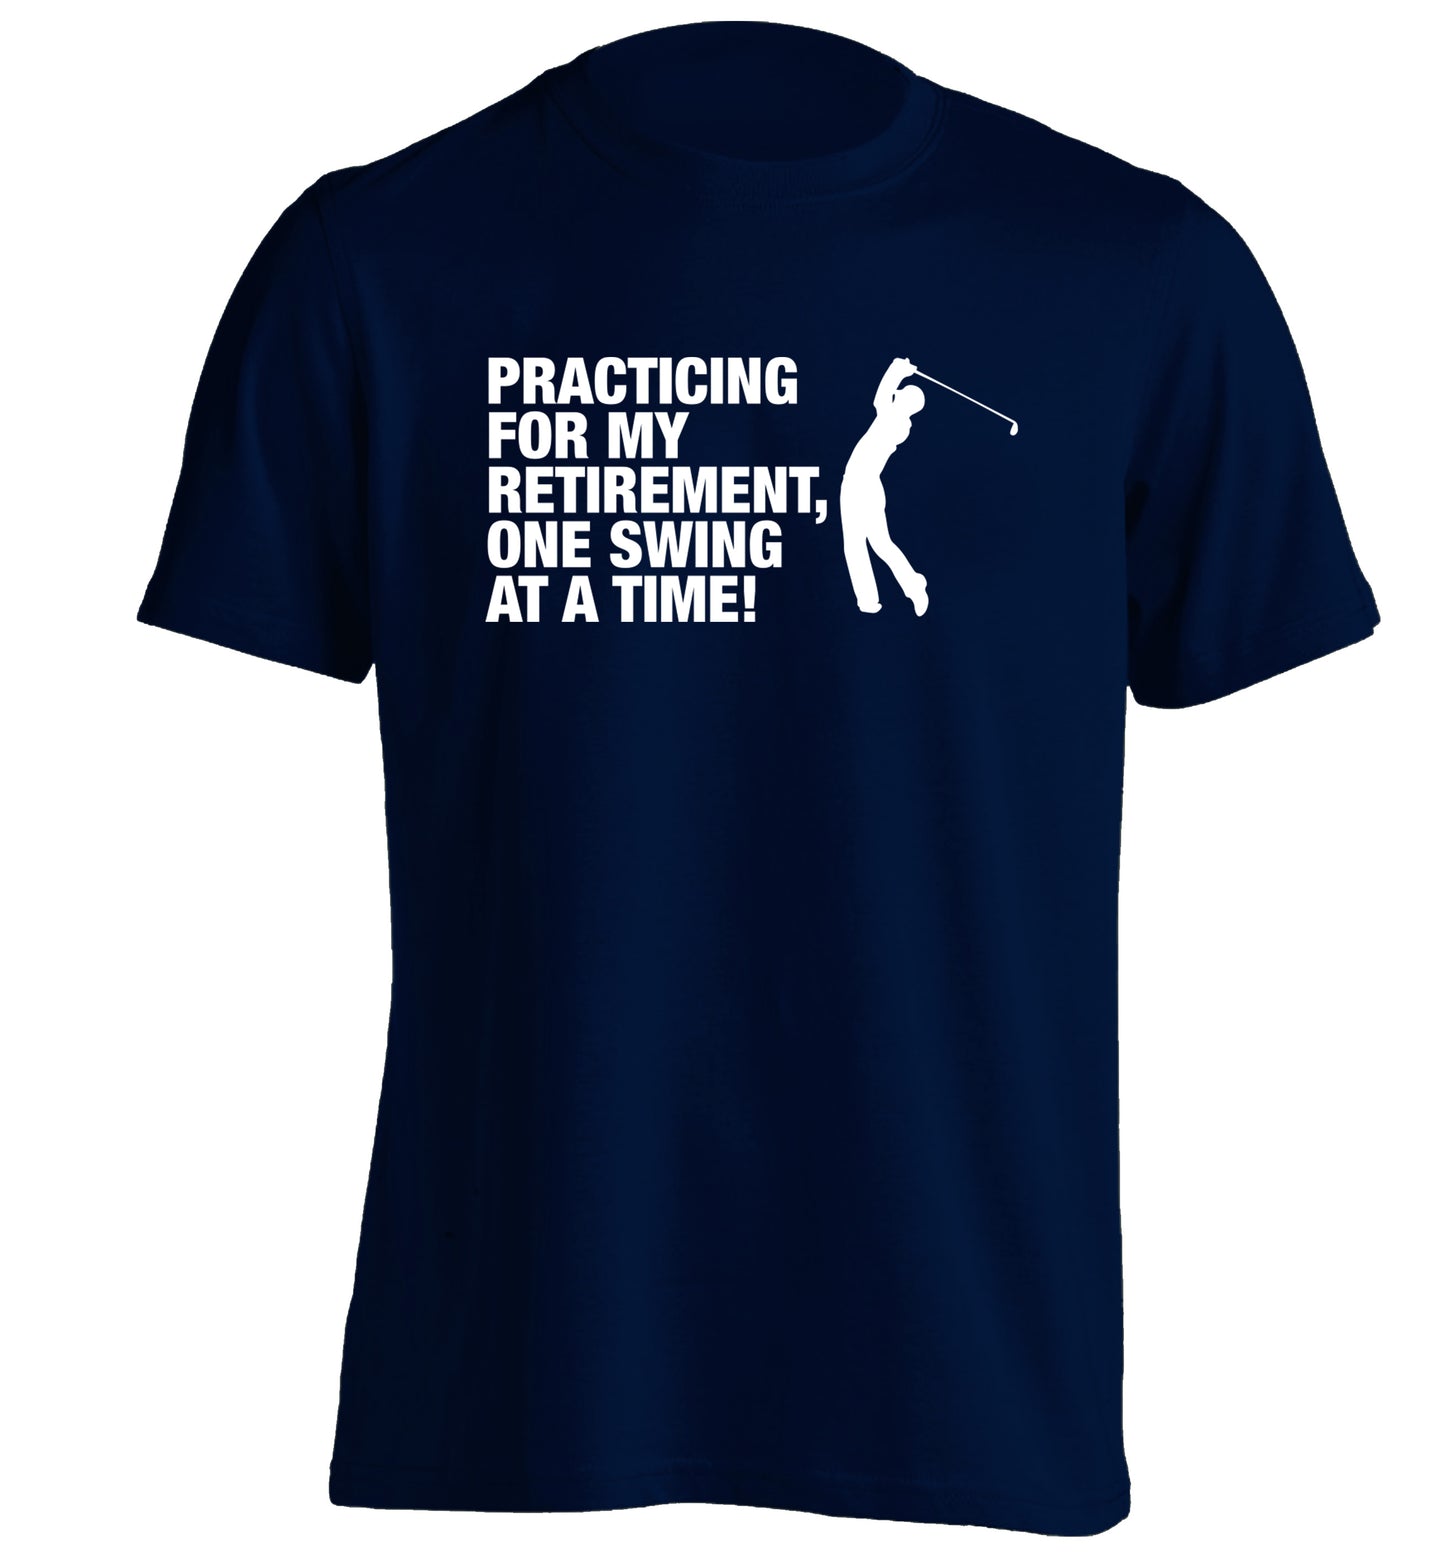 Practicing for my retirement one swing at a time adults unisex navy Tshirt 2XL